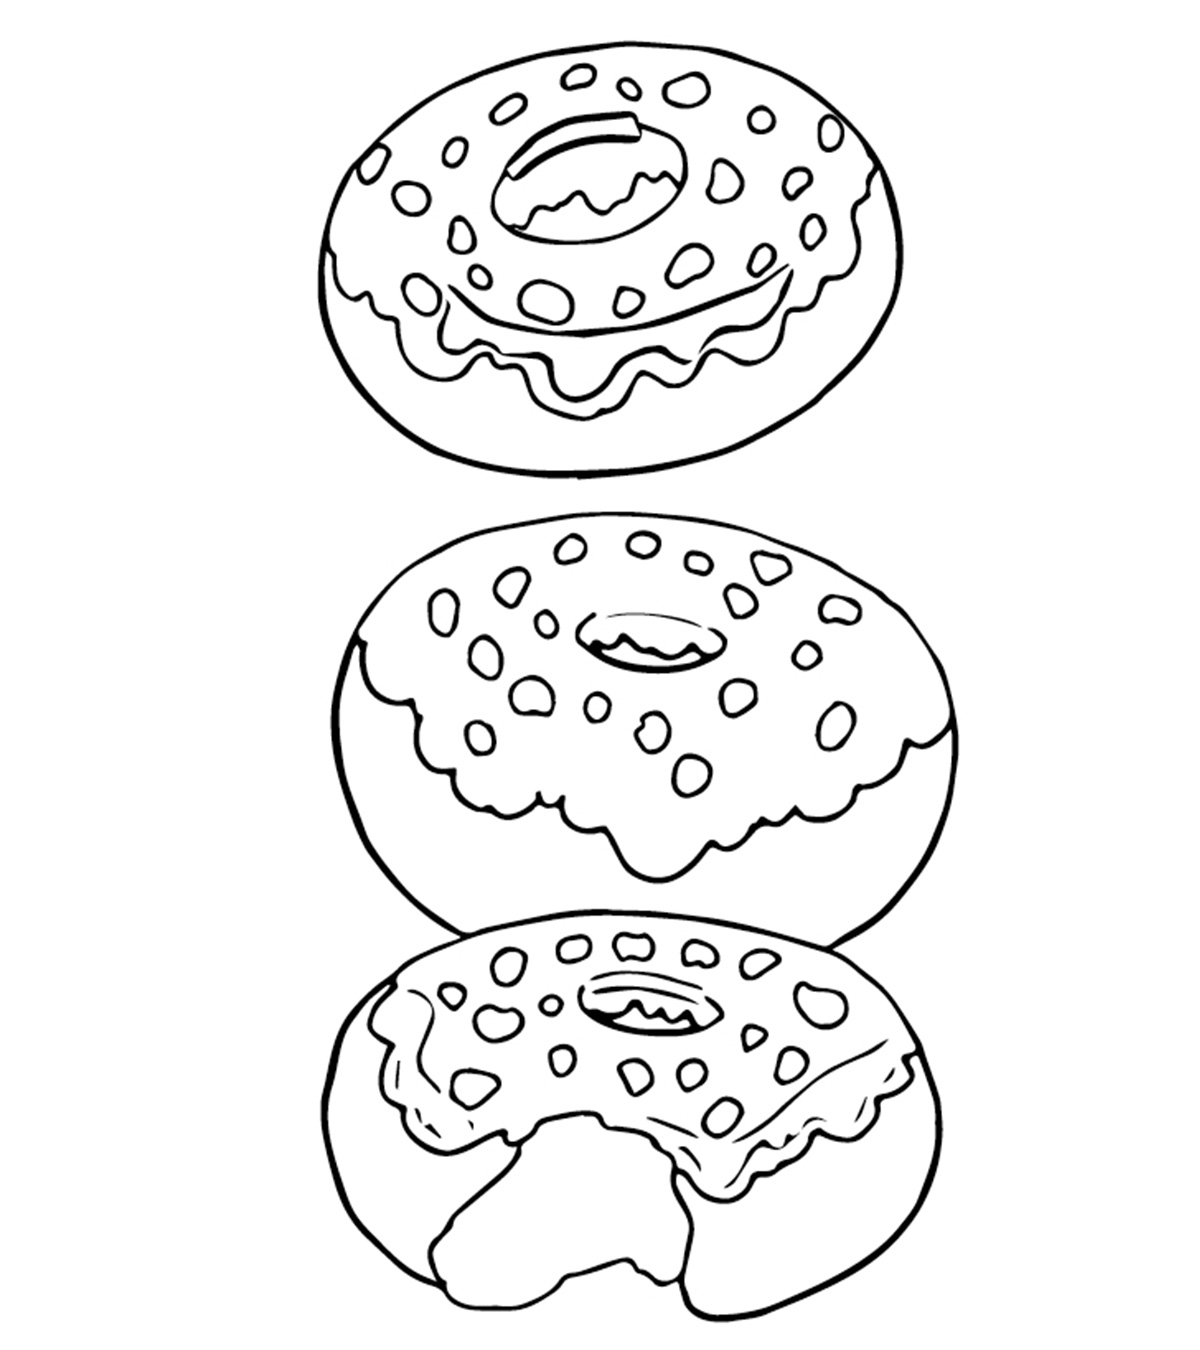 Donut 5 Coloring Pages